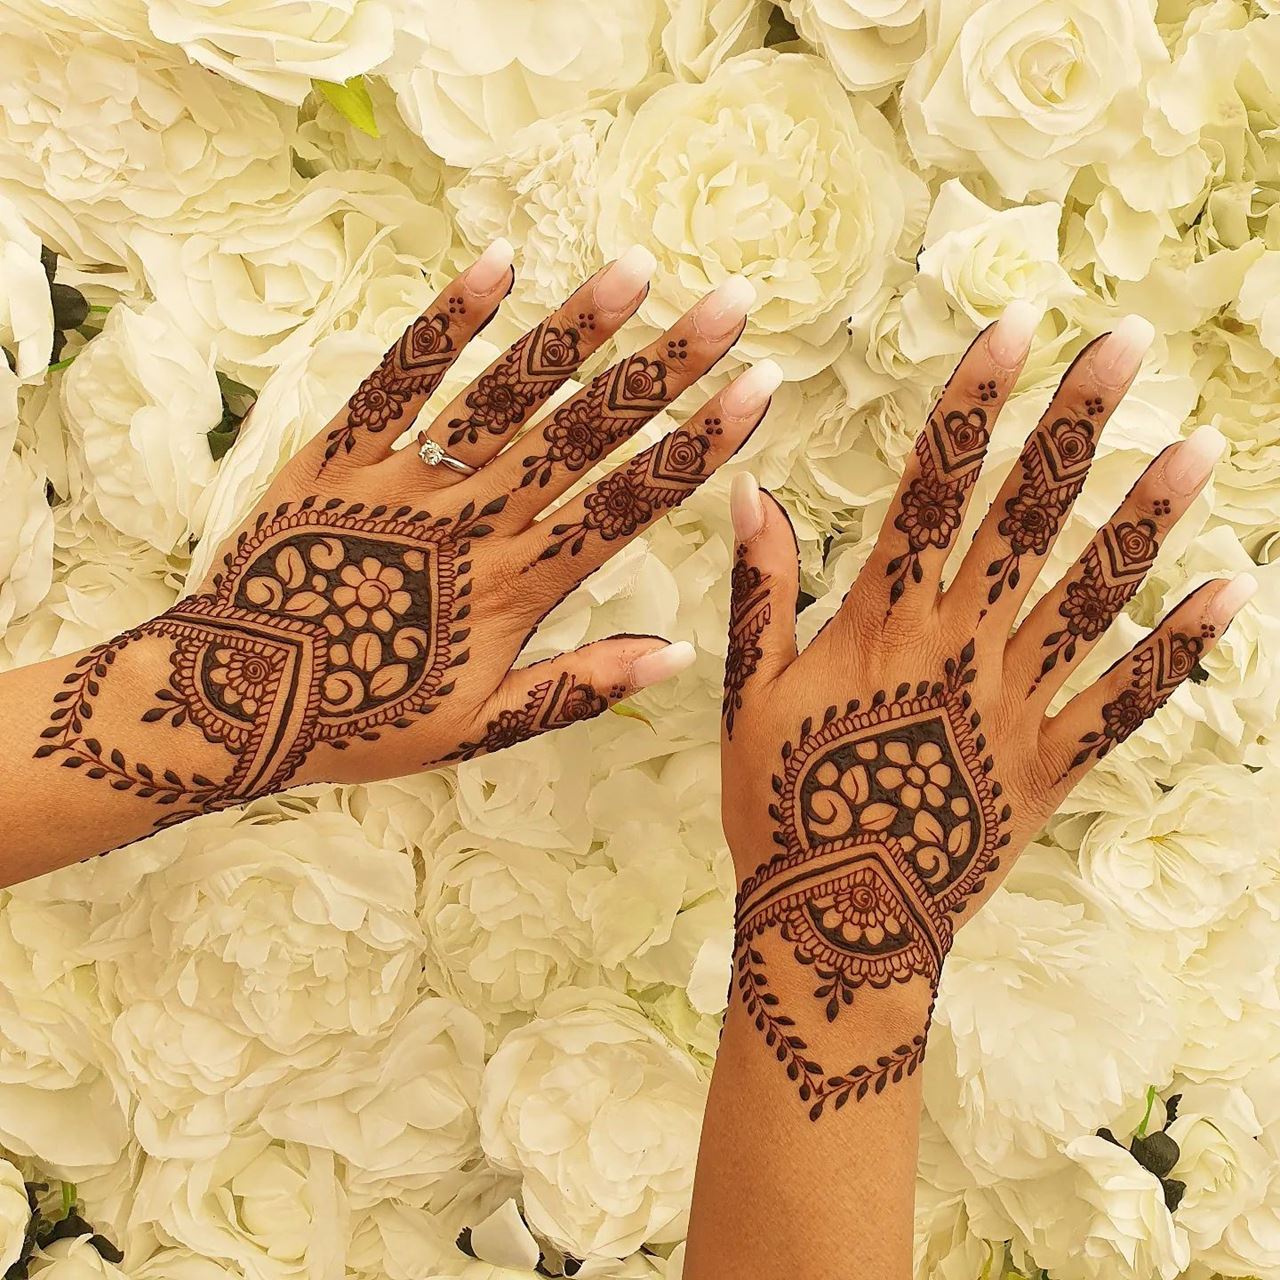 What is Henna and what happens at Henna Night?